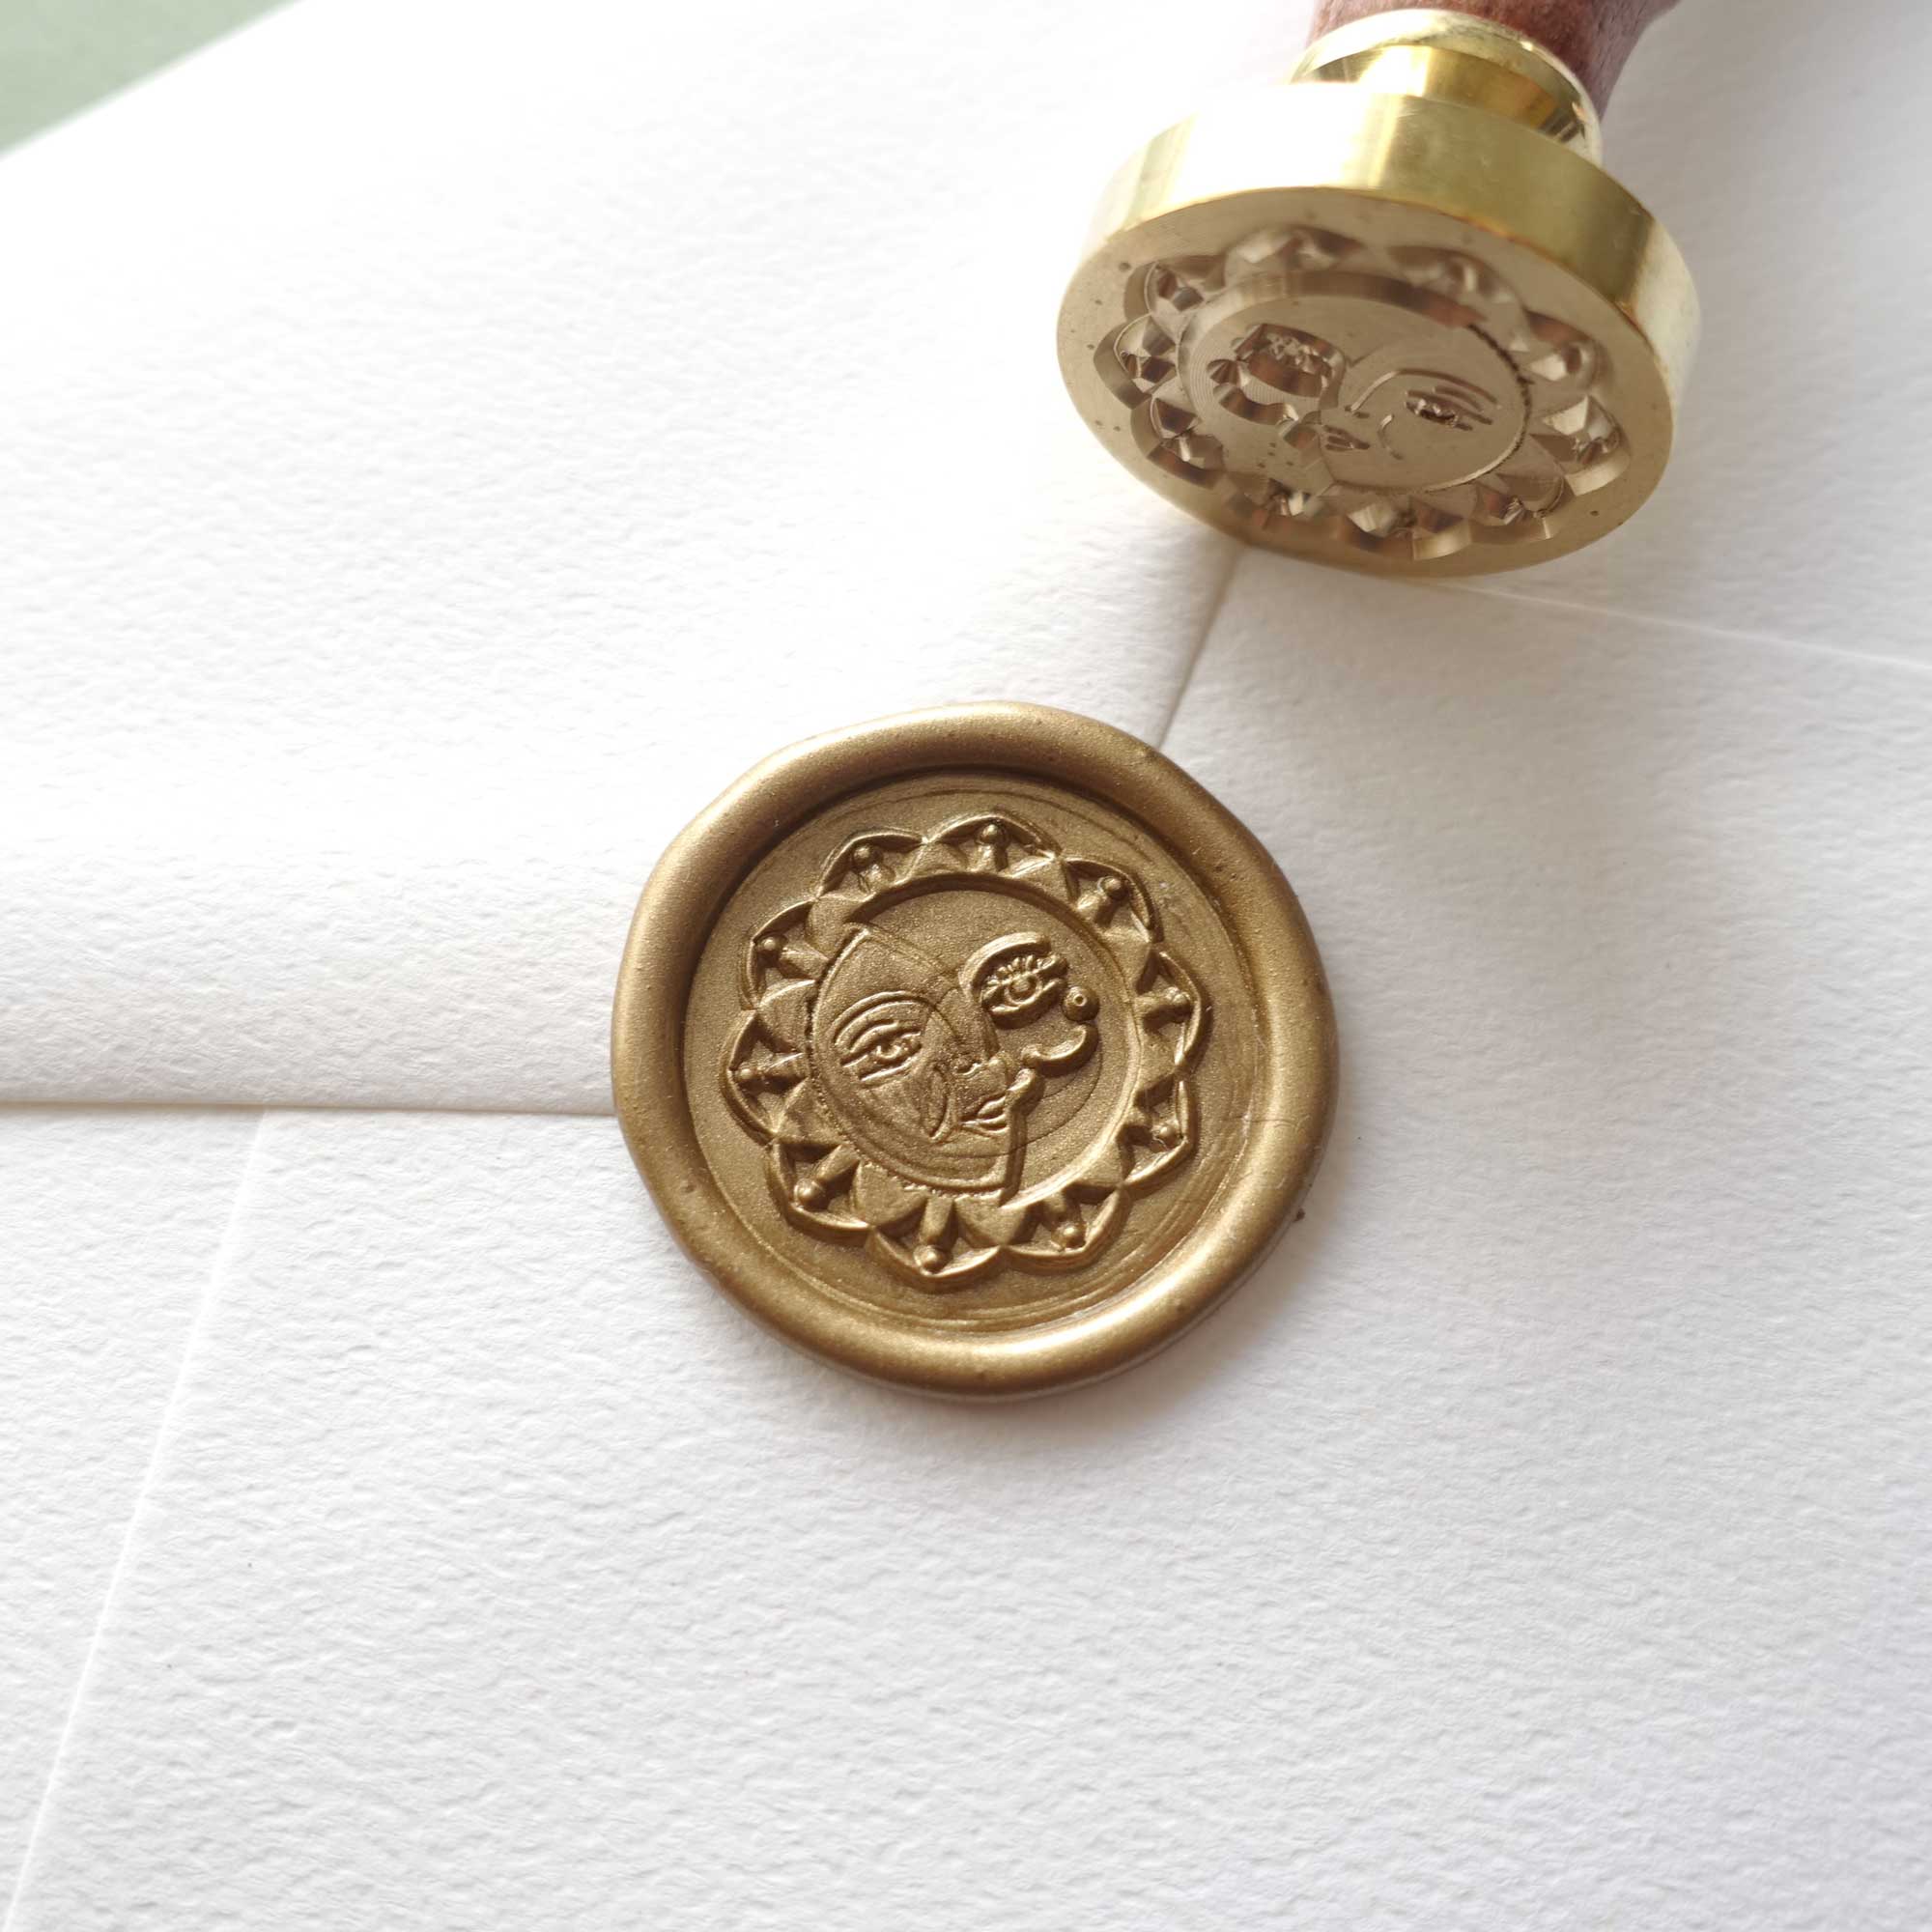 Sun and moon celestial wax sealing stamp Australia with bronze gold wax seal 